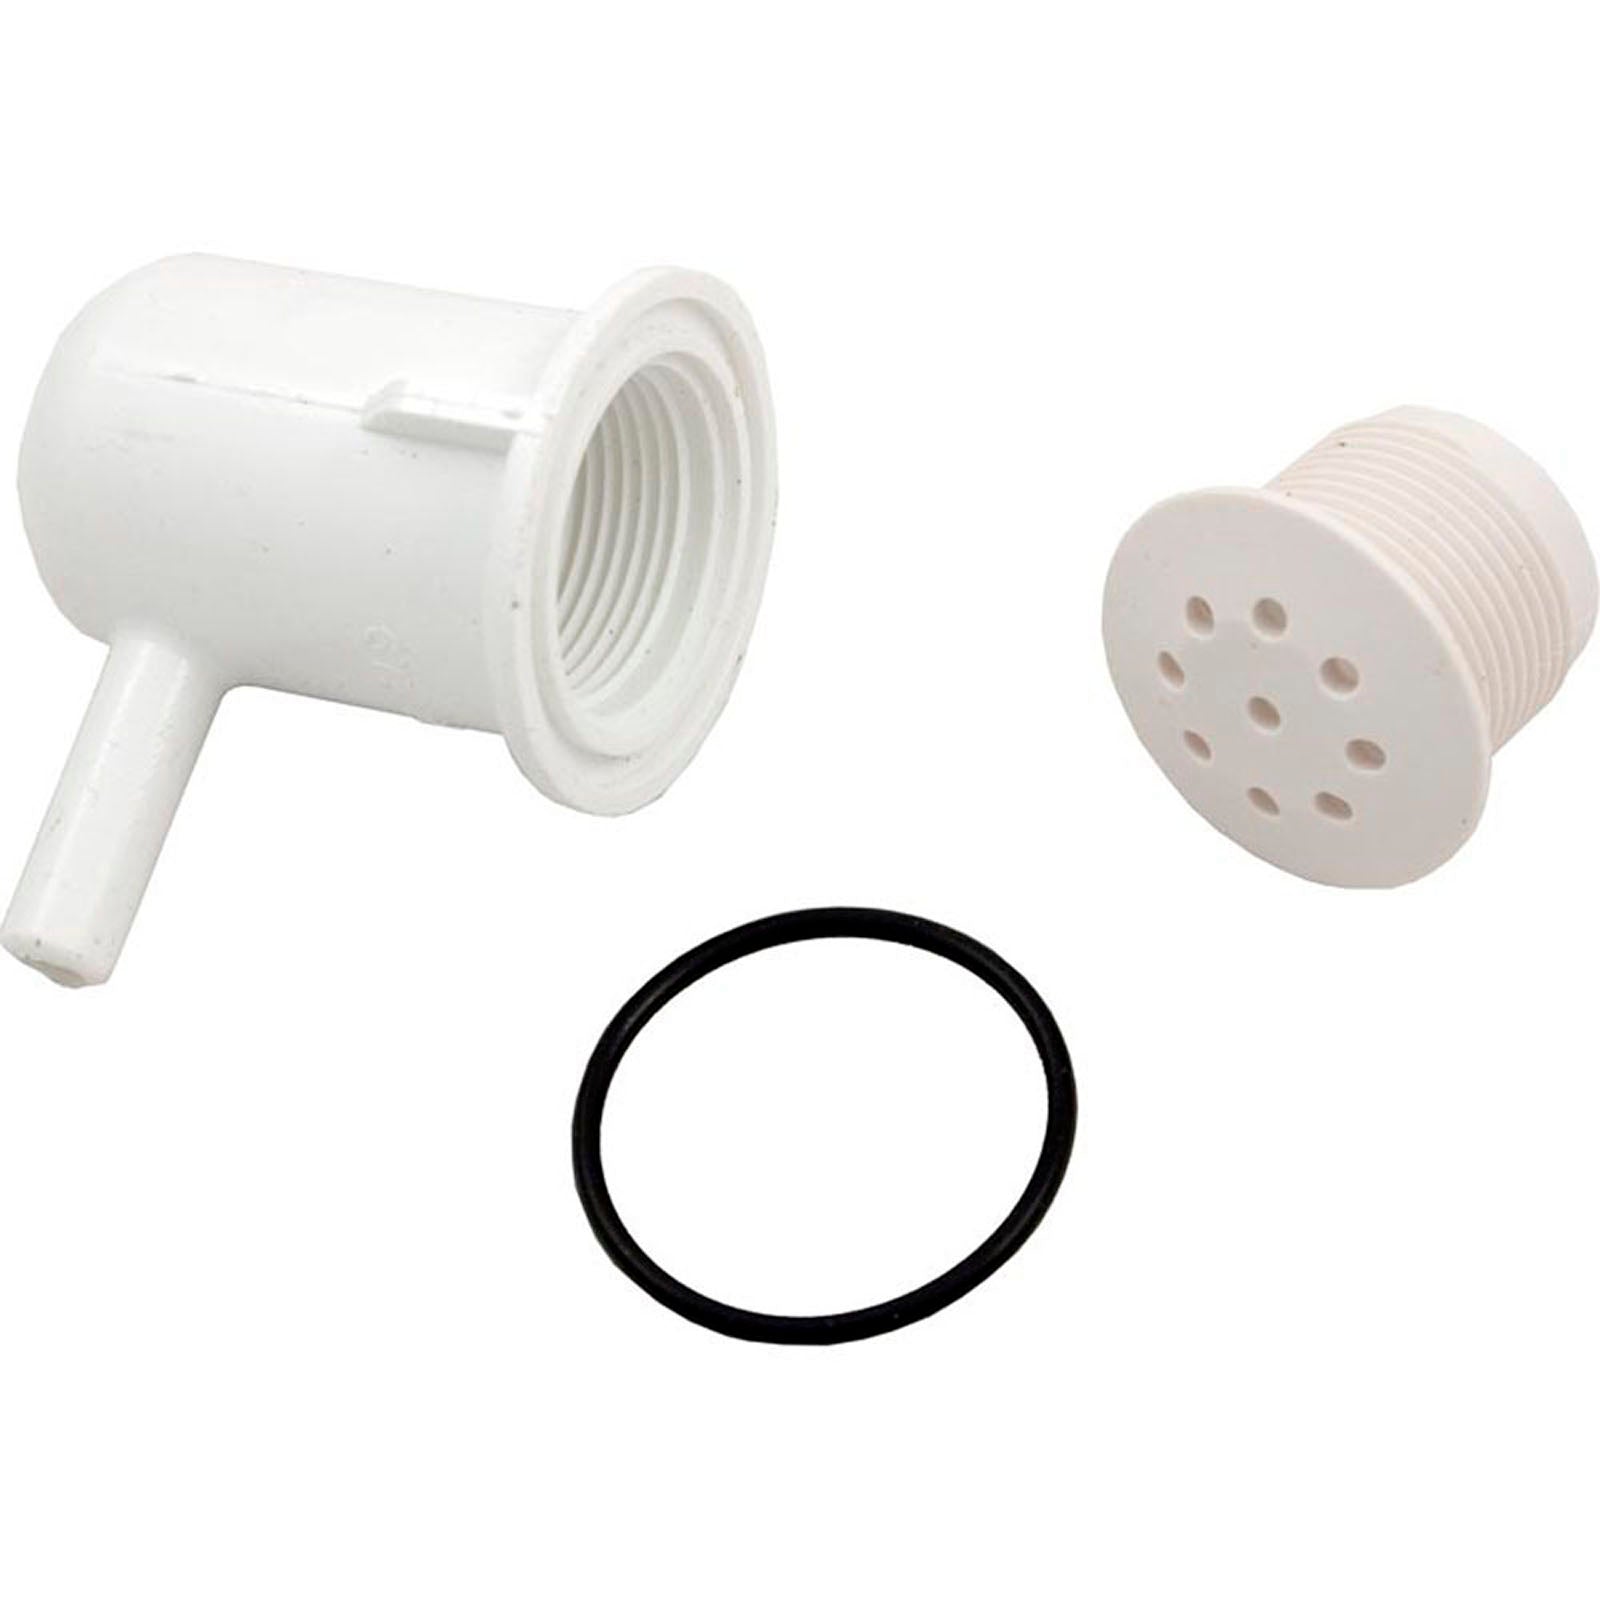 Waterway Top Flow Air Injector [3/8" Elbow Style] [White Escutcheon] (670-2300)